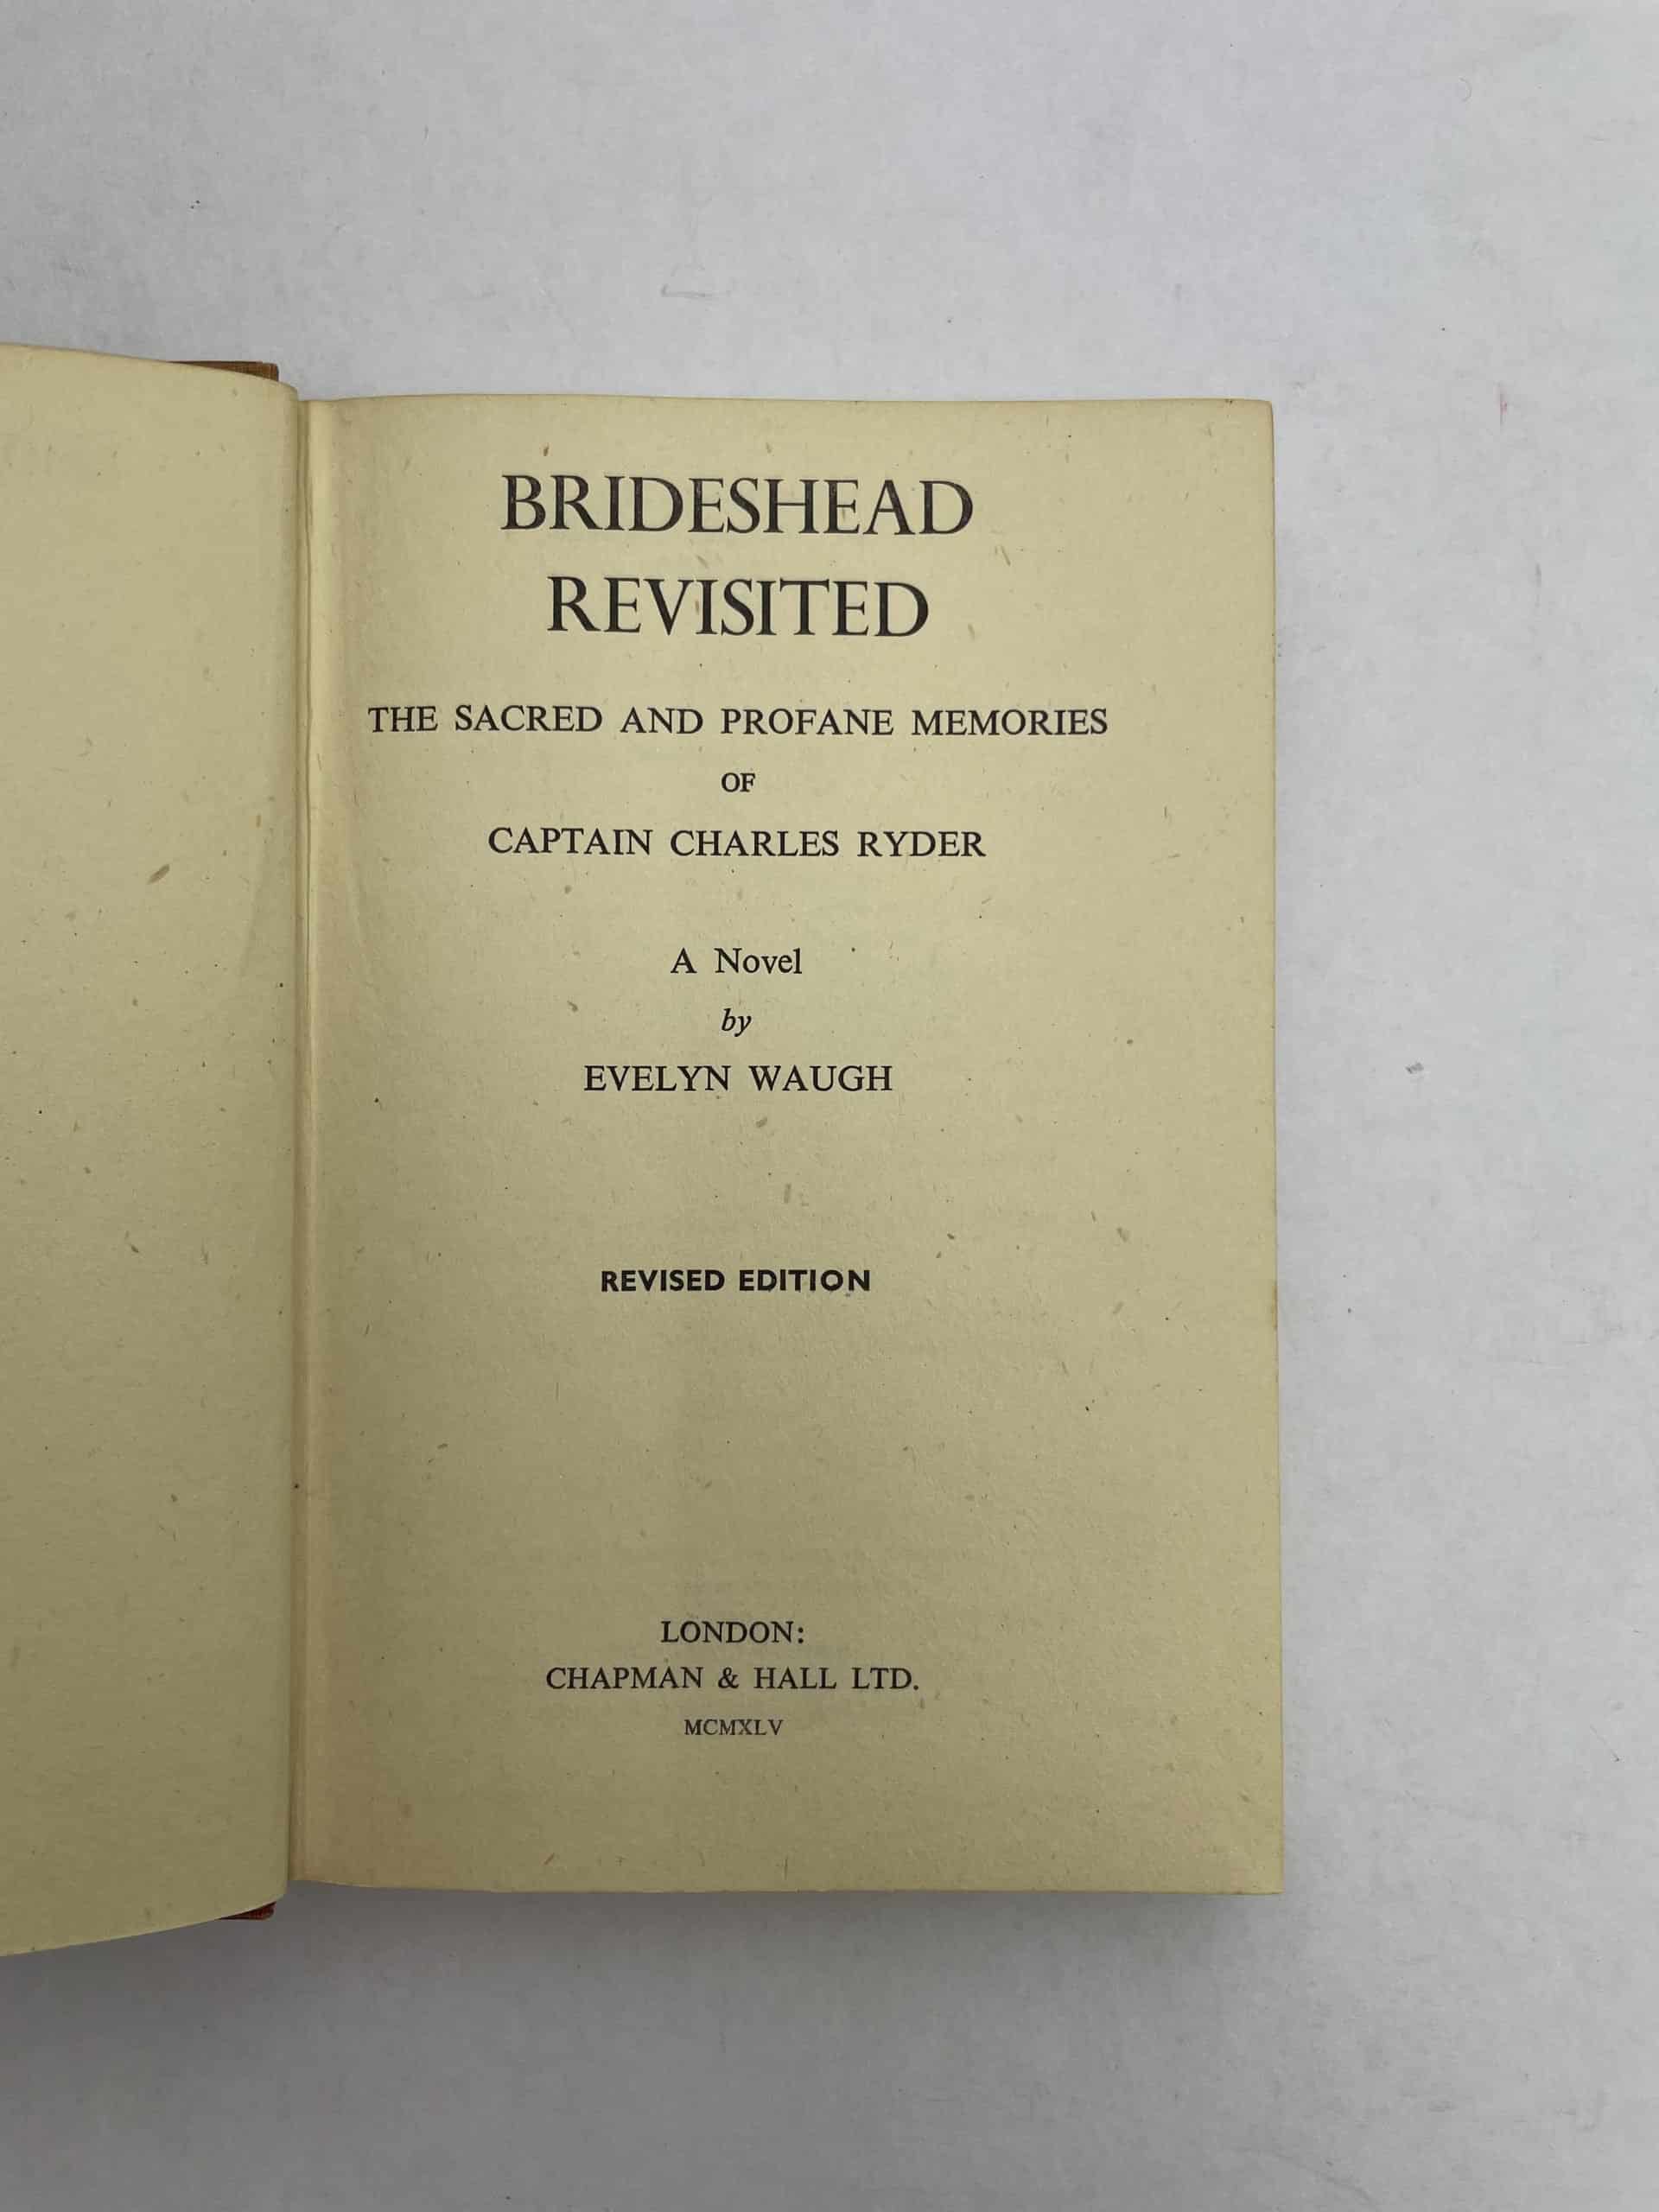 evelyn waugh brideshead revisited first ed2